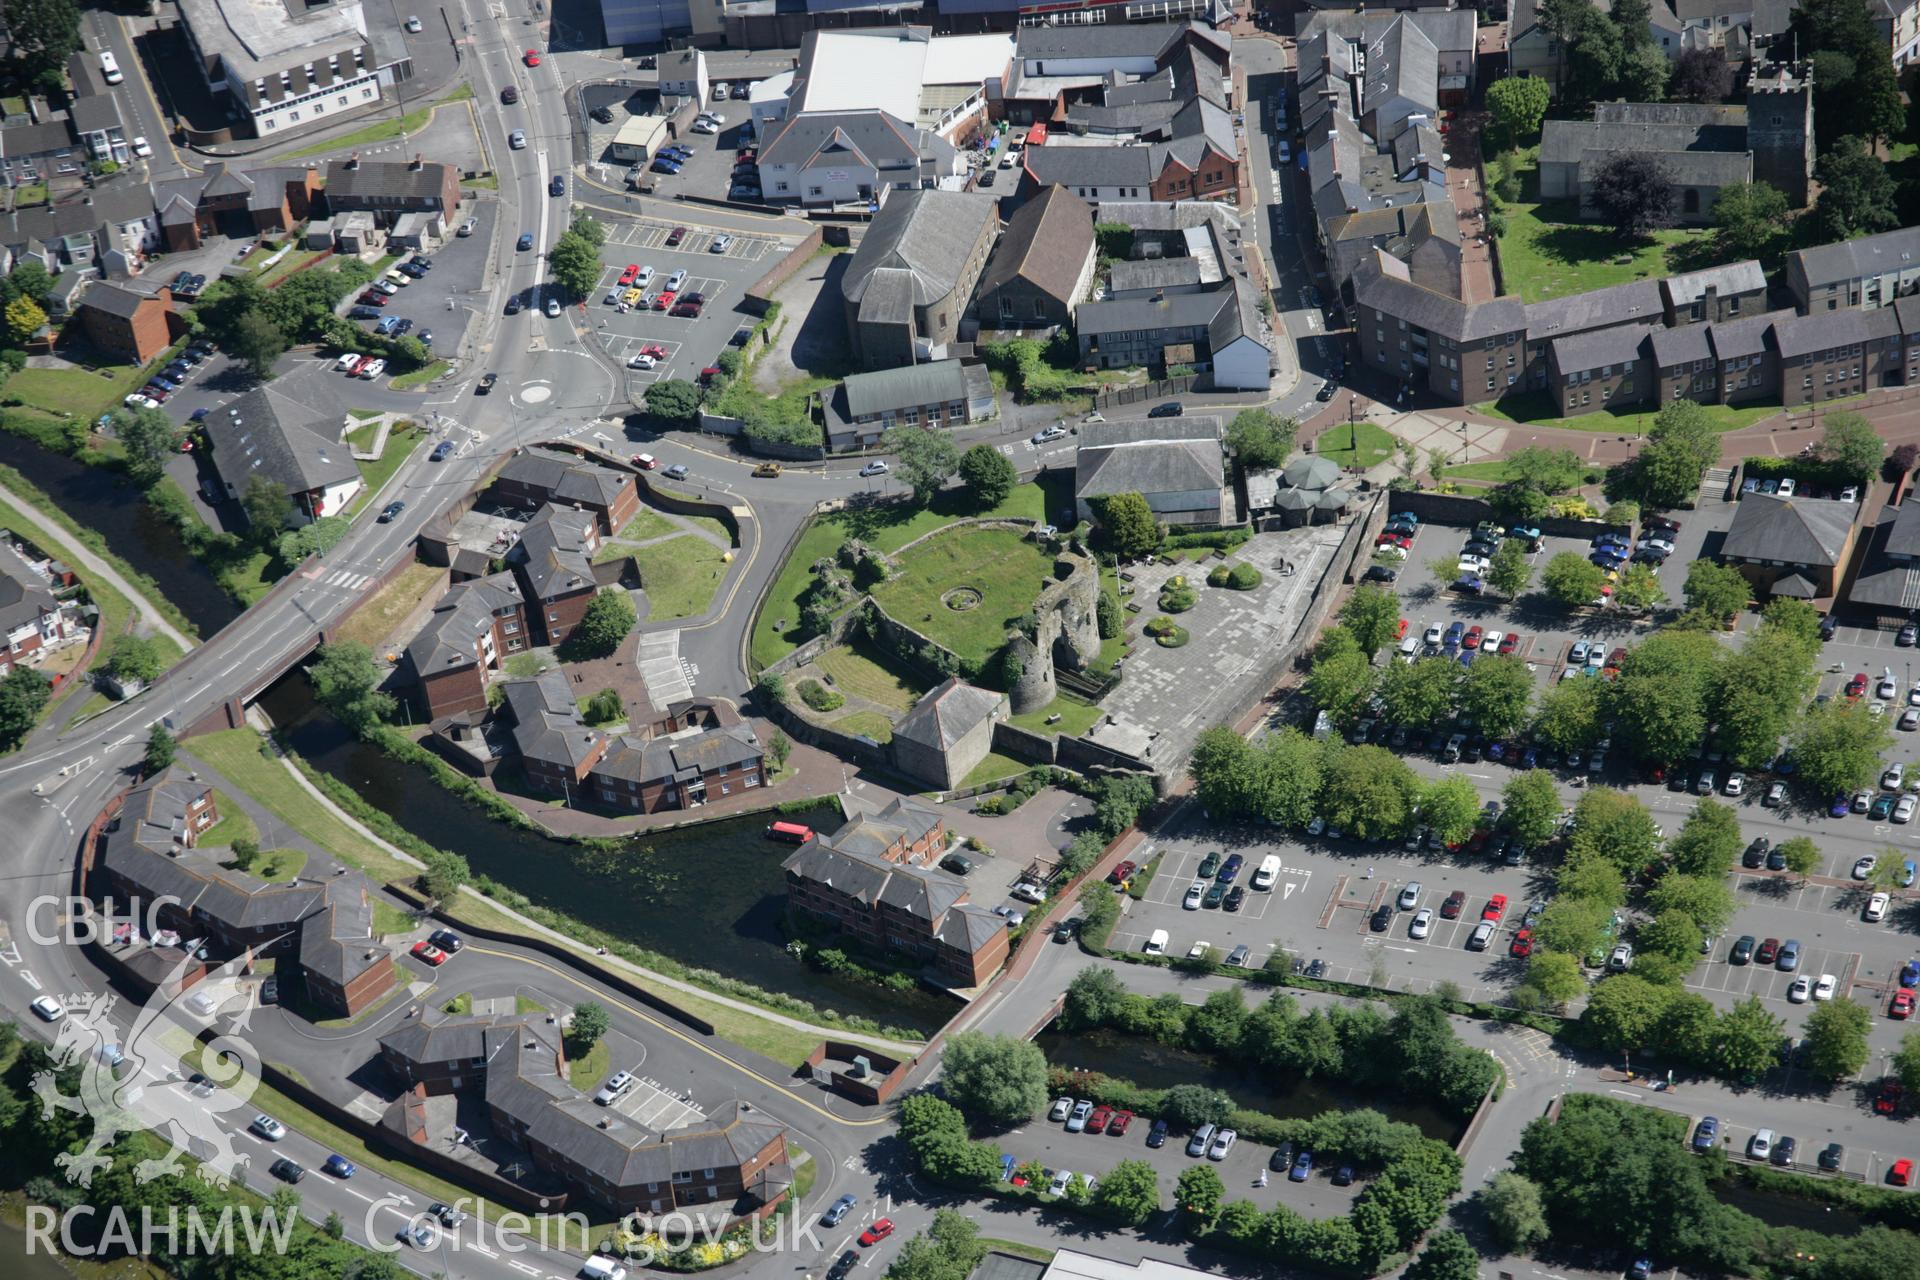 RCAHMW colour oblique aerial photograph of Neath Castle viewed from the north. Taken on 22 June 2005 by Toby Driver